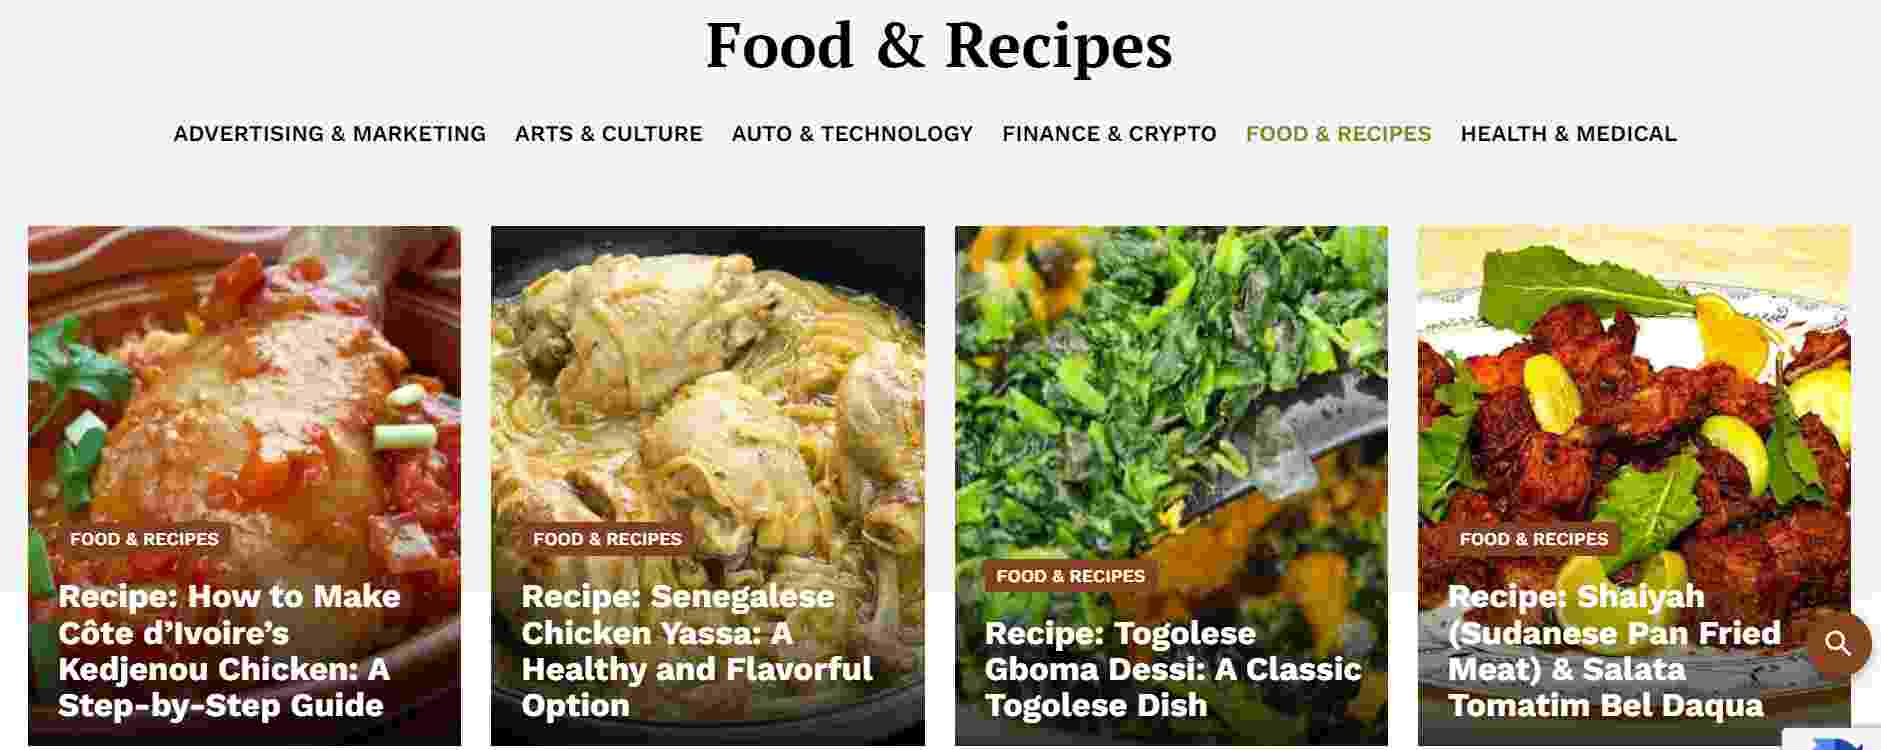 Spotcovery food and Recipe Page.